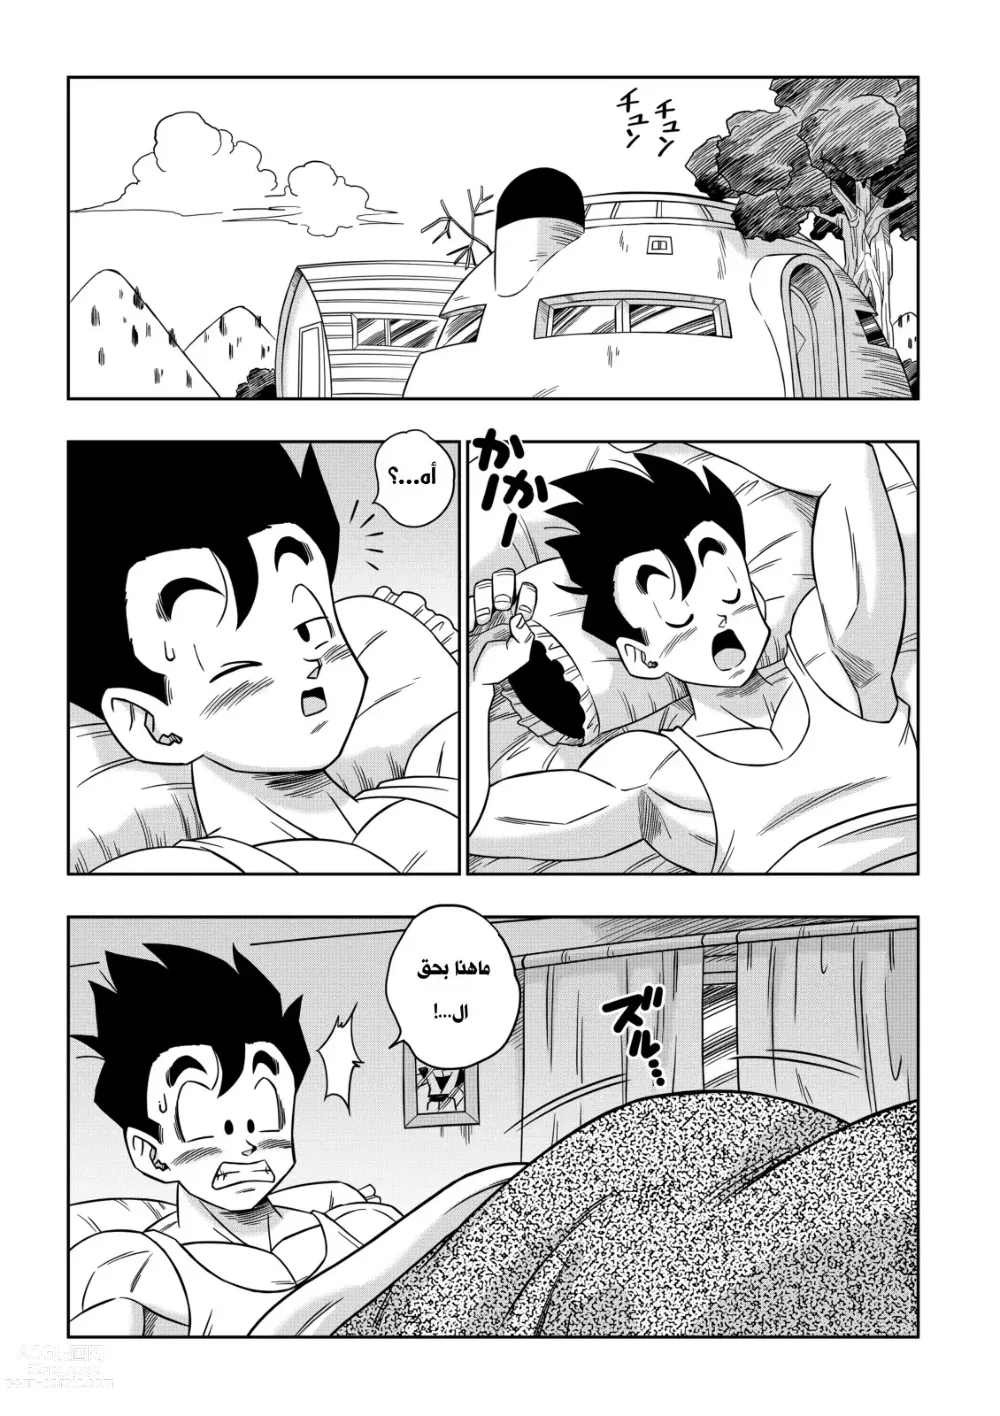 Page 3 of doujinshi LOVE TRIANGLE Z PART 5